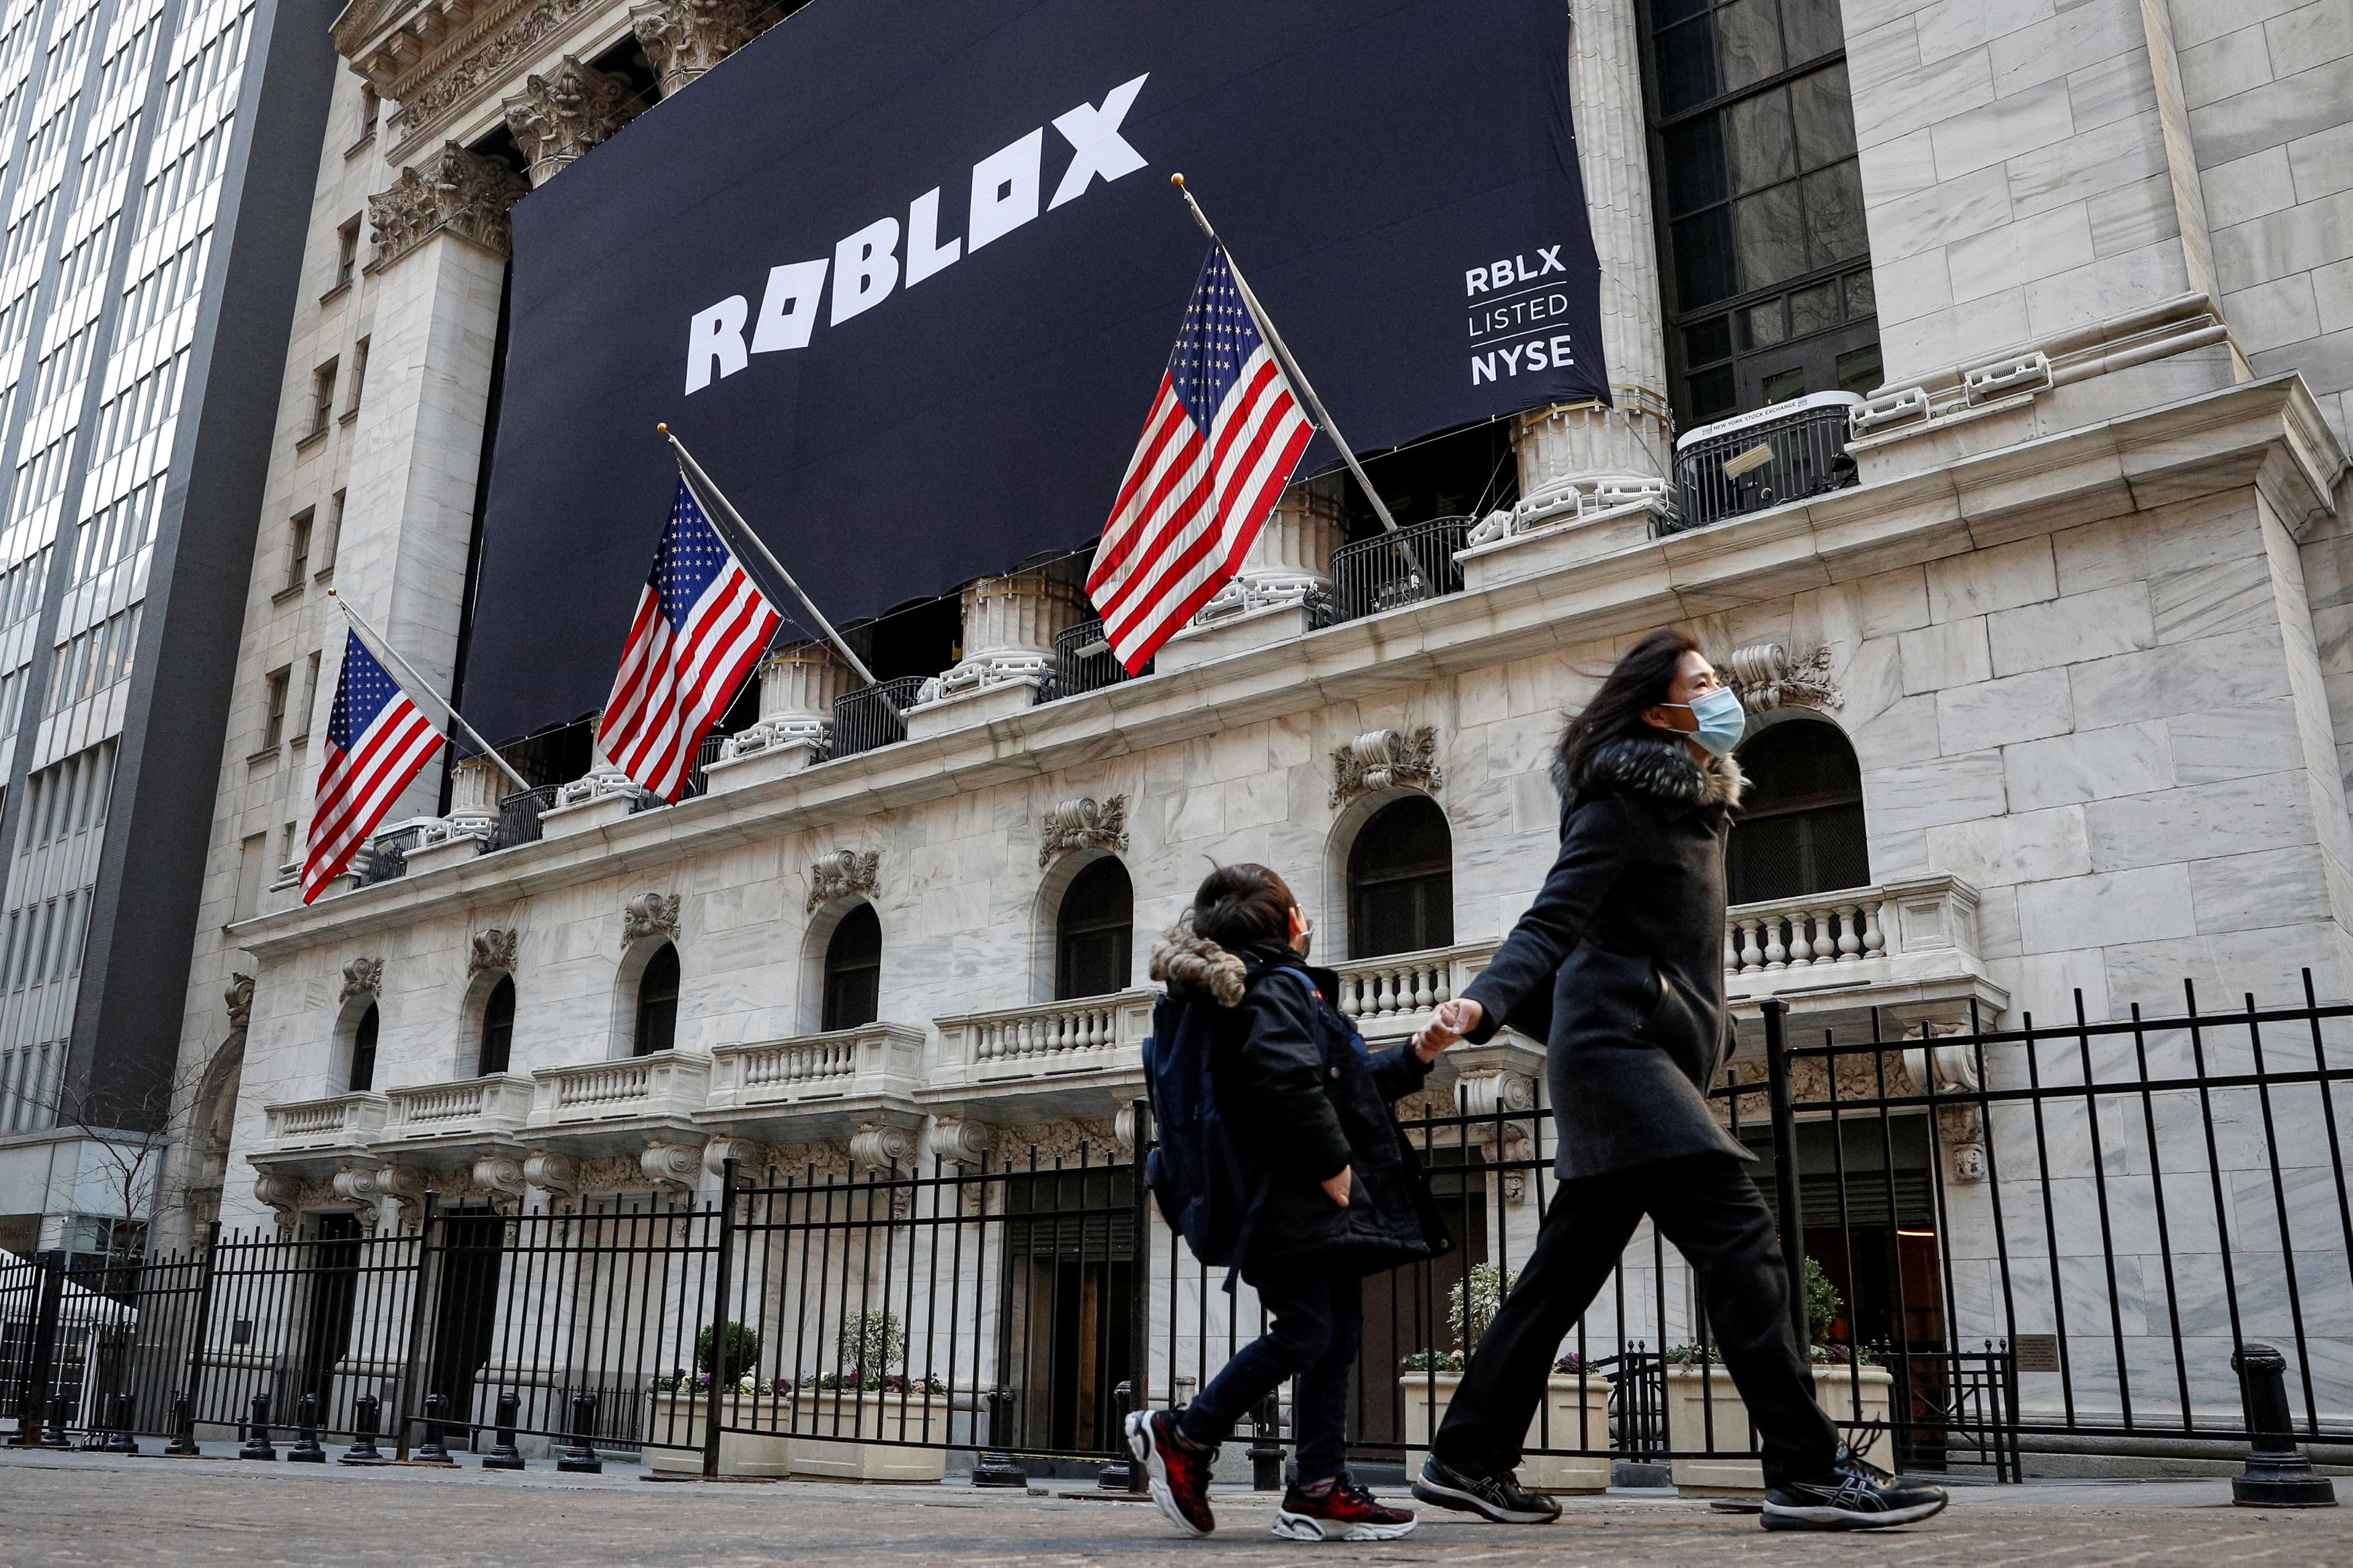 Morgan Stanley downgrades Roblox, says it's time to sell the video game stock